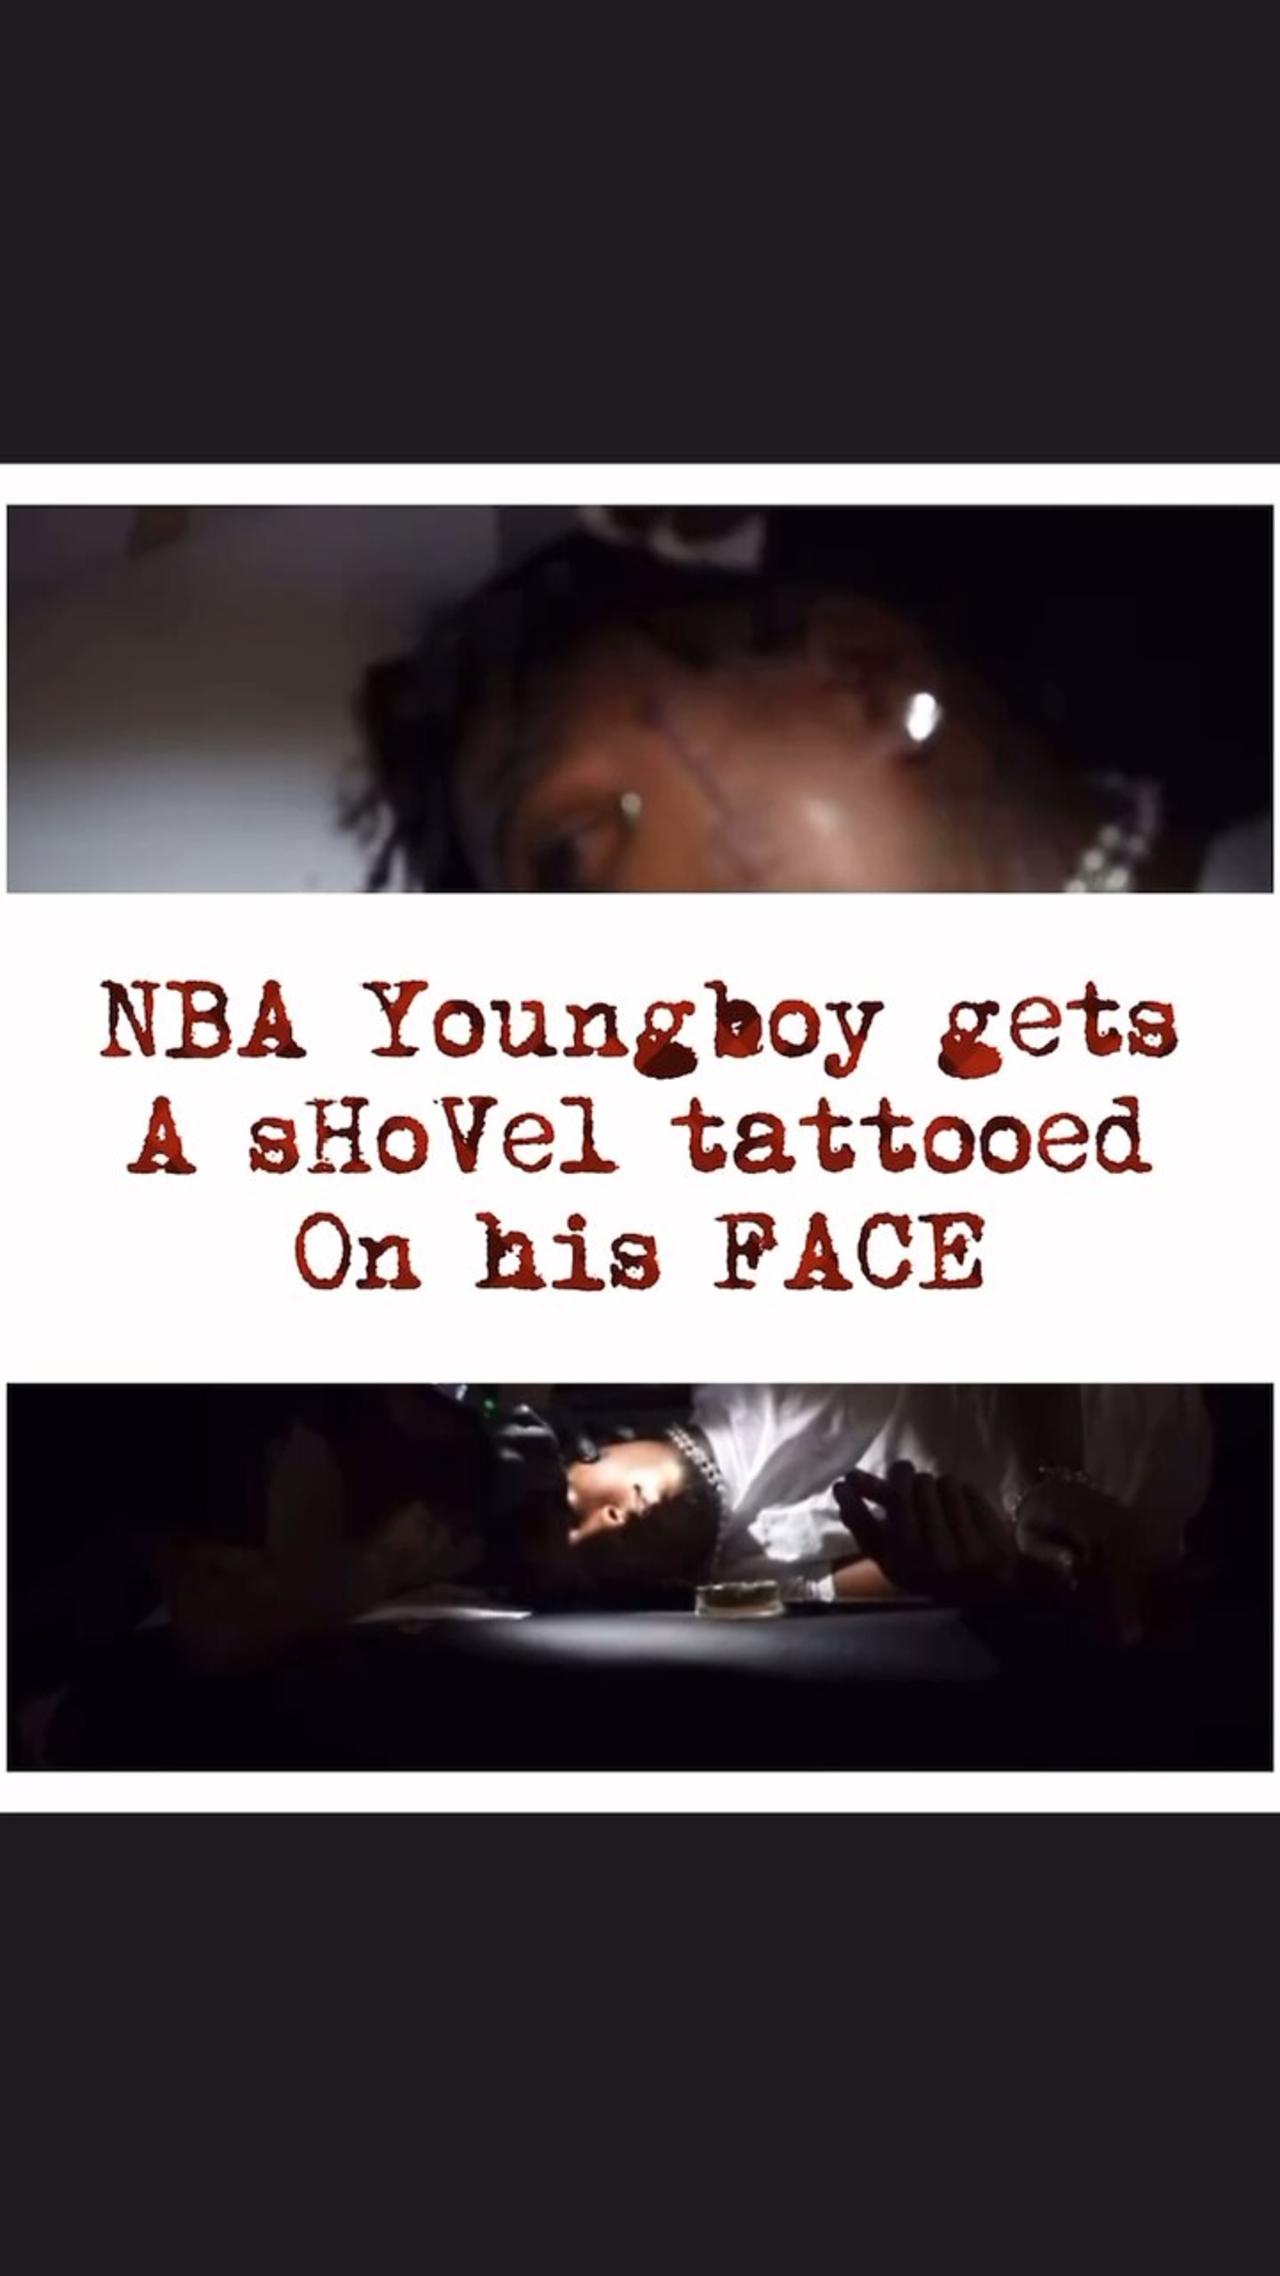 The Gravedigger Himself NBA Youngboy Gets A Shovel Tattooed On His Face